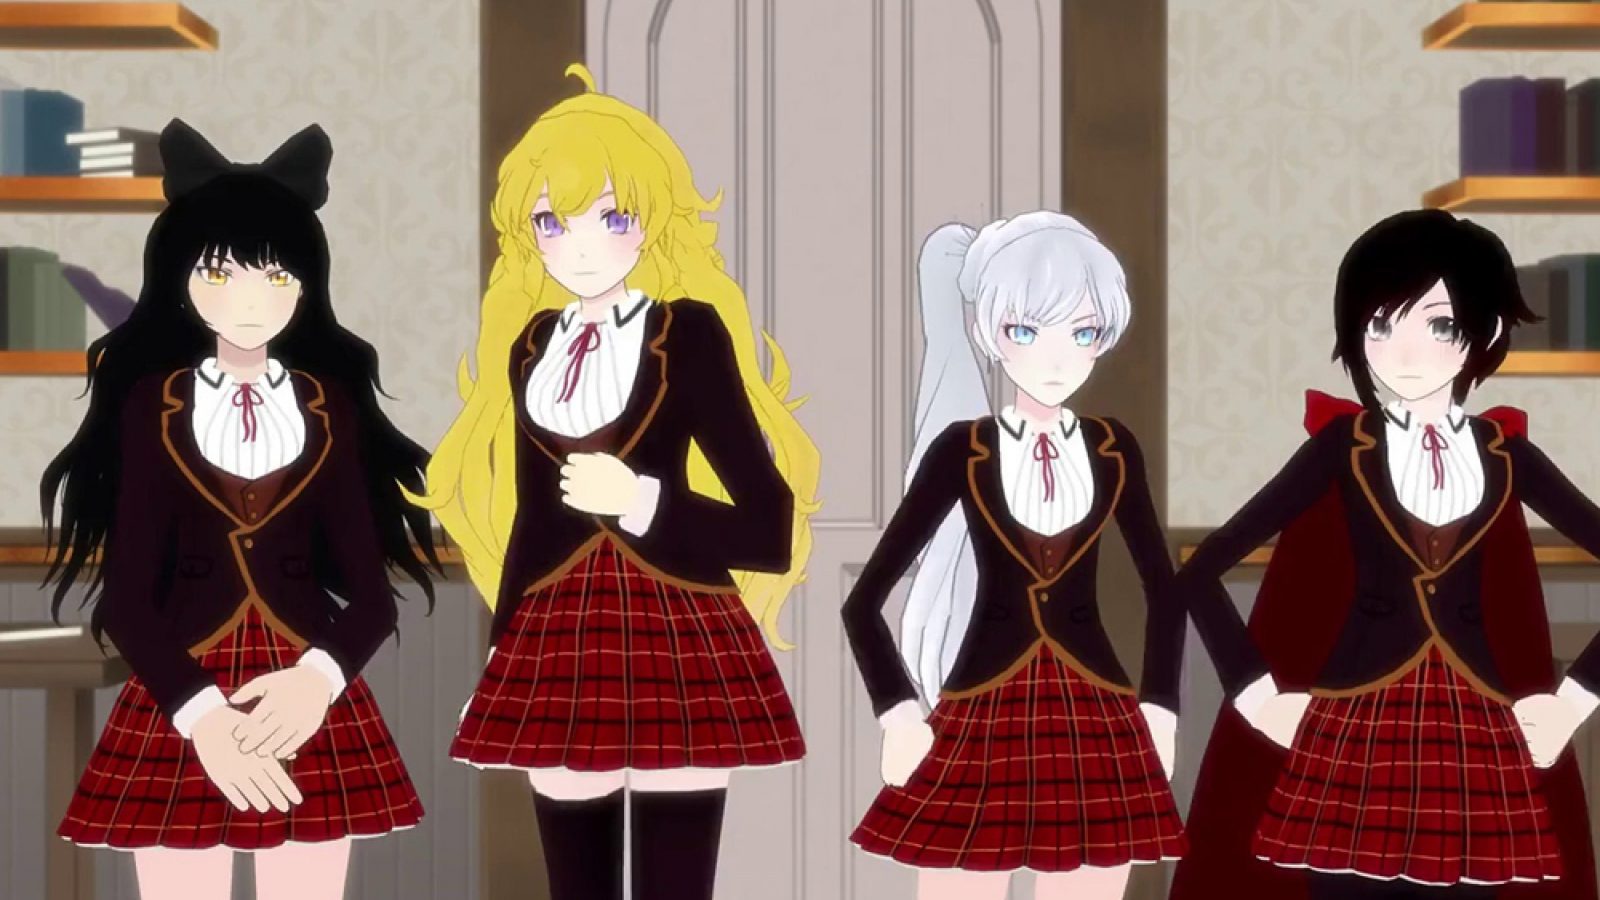 RWBY fan recreates main characters in classic anime style - Dexerto